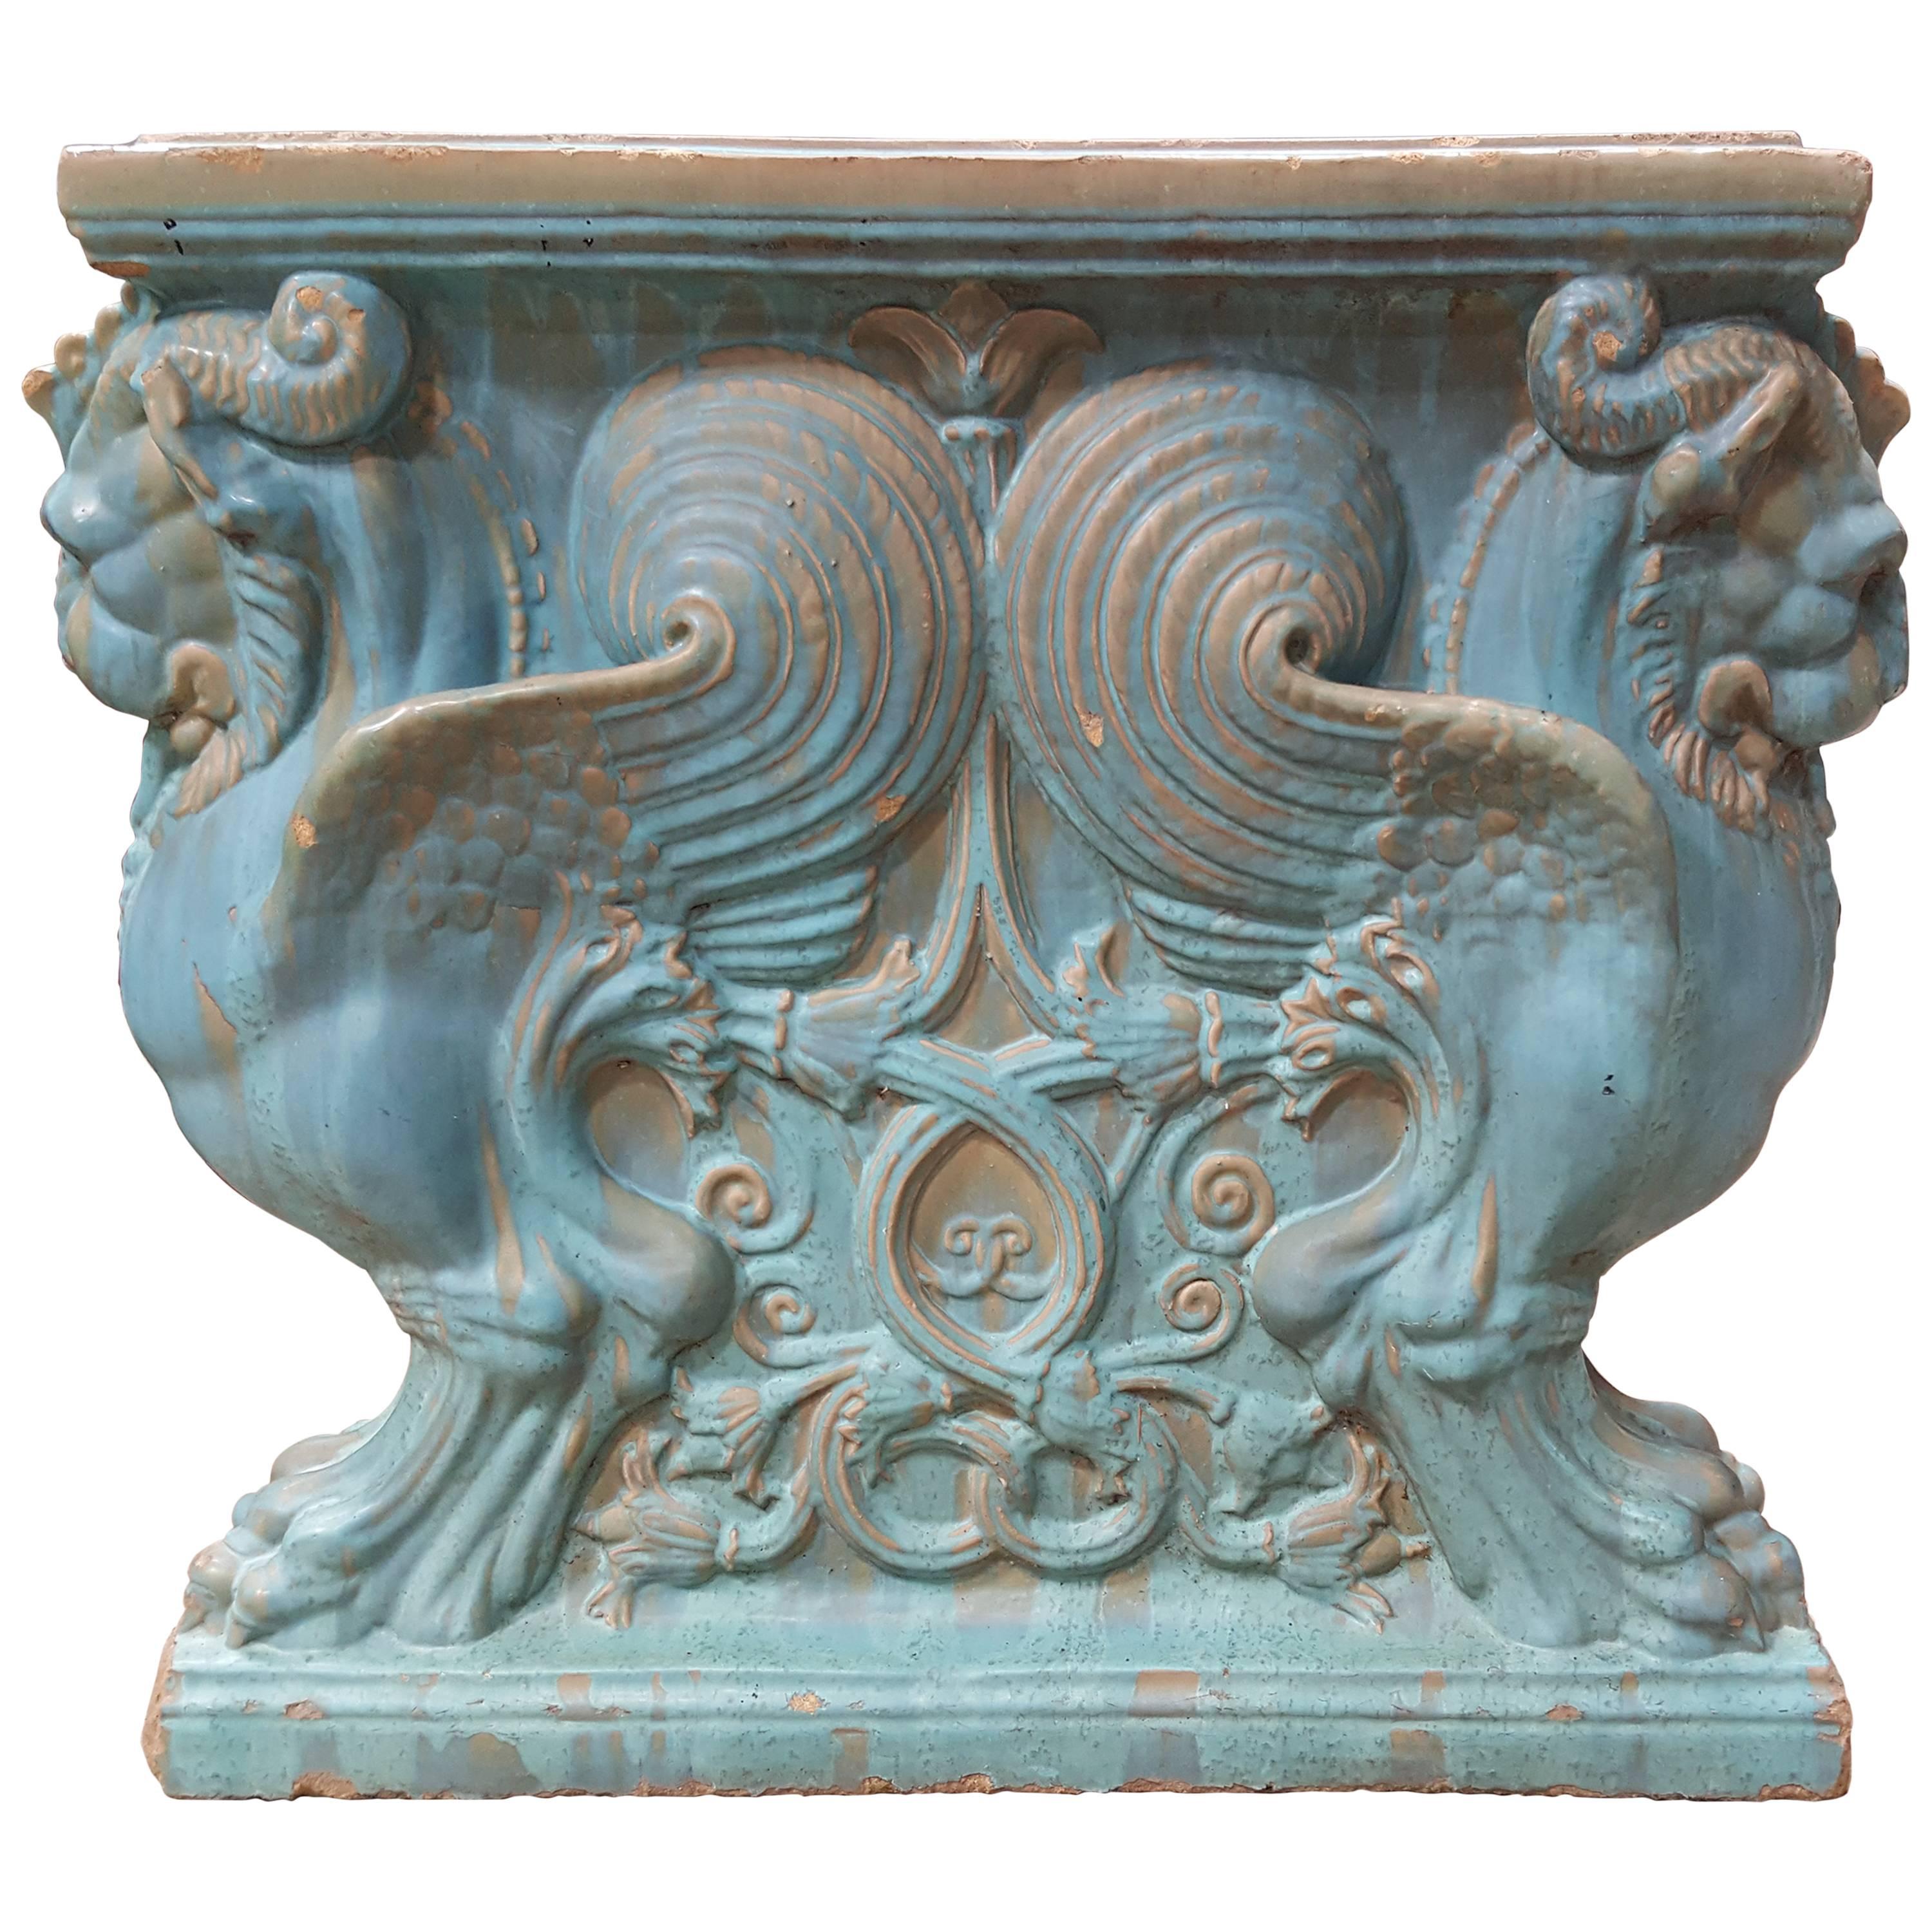 Winged Lion Pedestal by Gladding, McBean Pottery